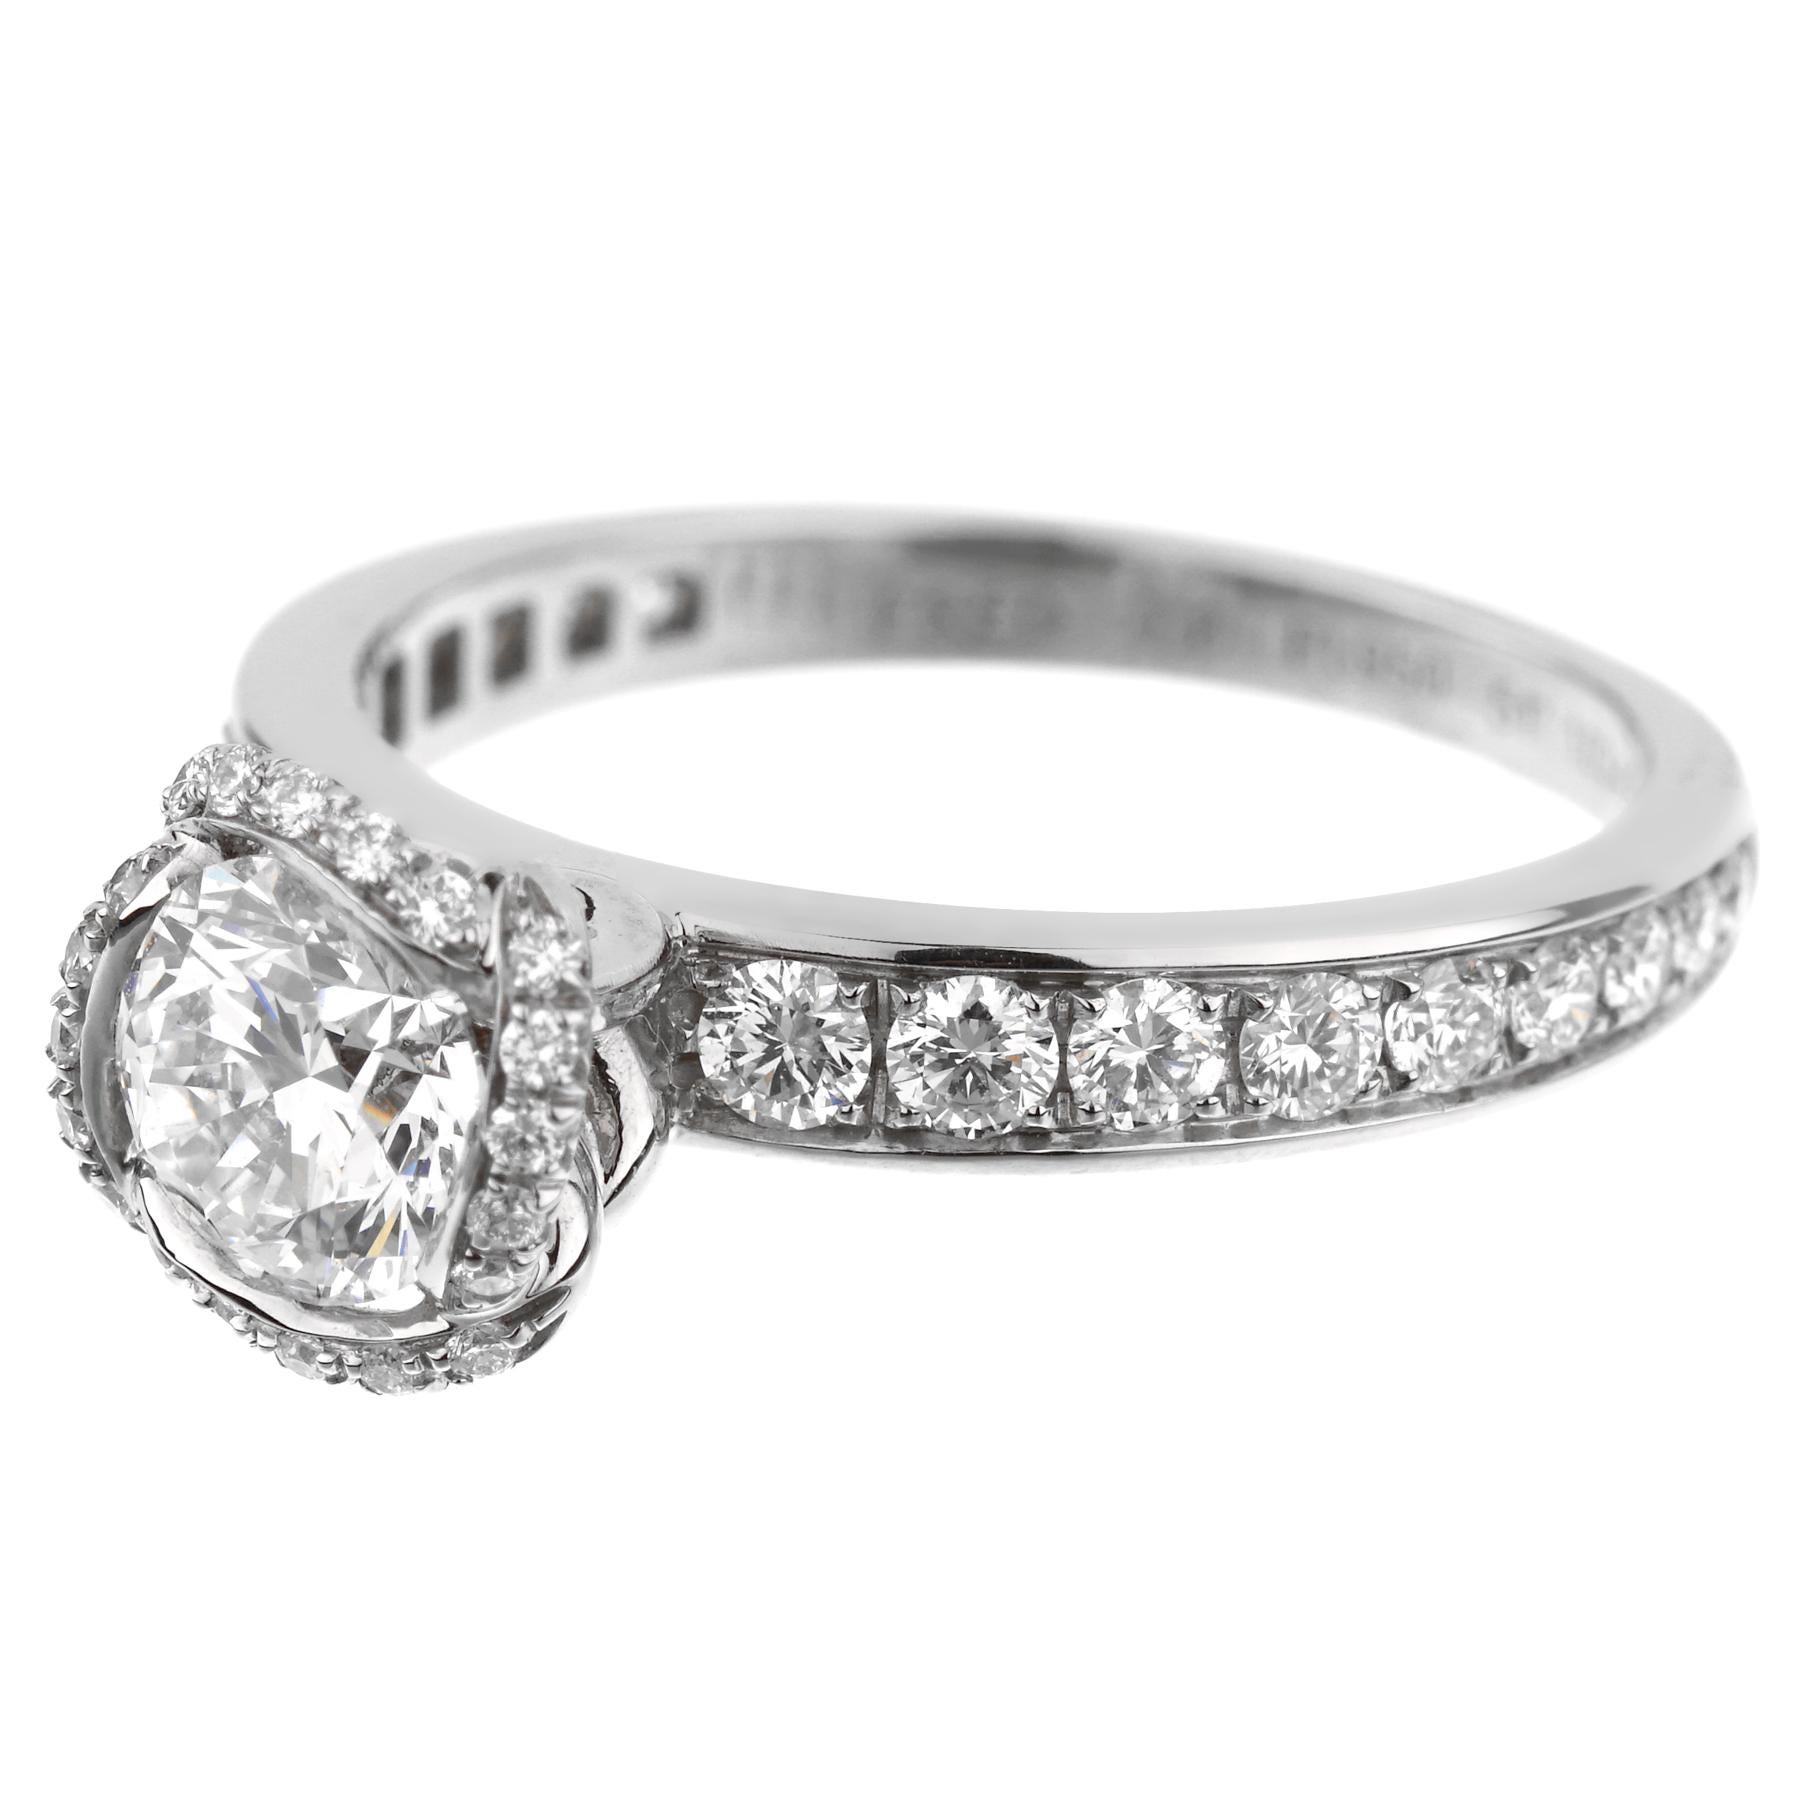 A chic Fred of Paris diamond engagement ring from the Fleur Celeste collection showcasing a .71ct GIA certified solitaire G color Vvs2 clarity adorned with .52ct of round brilliant cut diamonds set in platinum. The ring measures a size 6 and can be